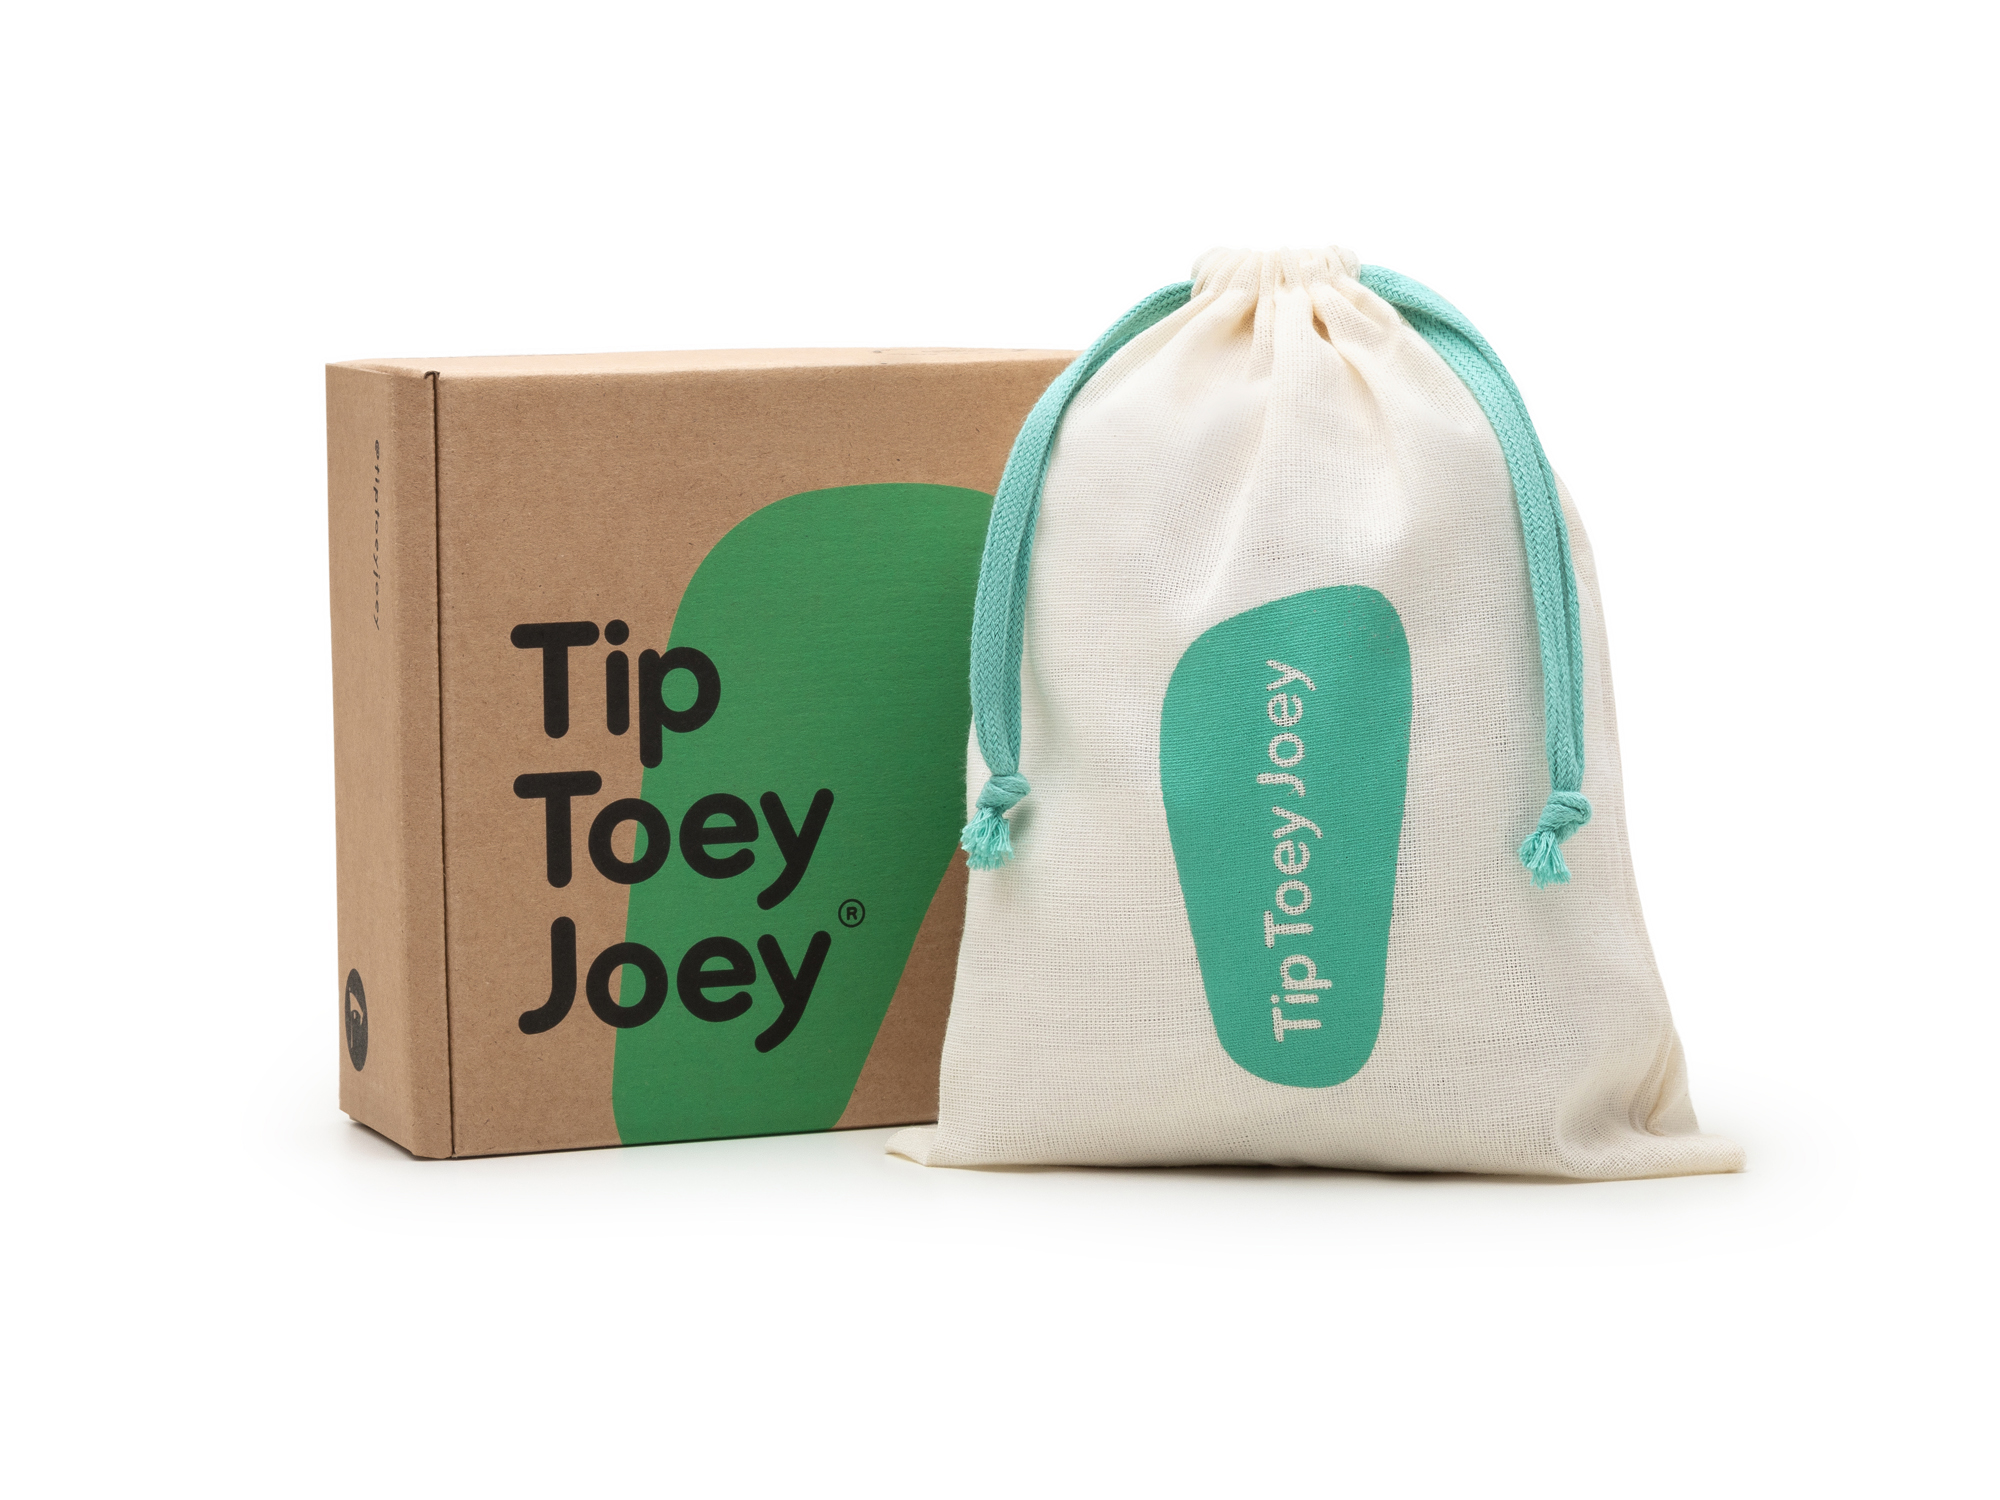 UP & GO Mary Janes for Girls Dolly | Tip Toey Joey - Australia - 5